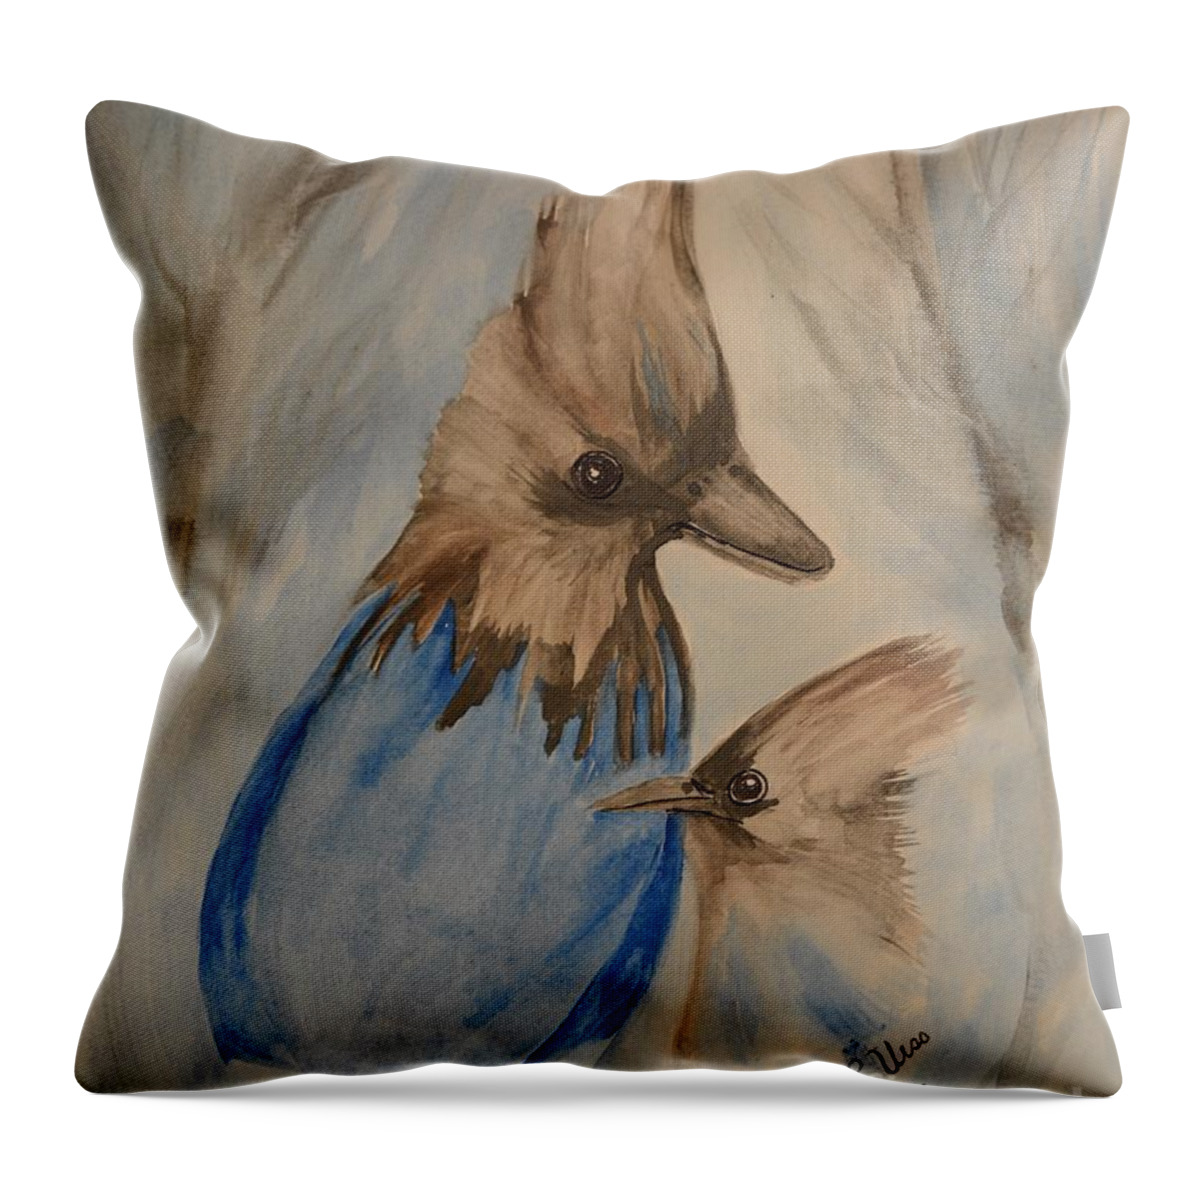 Stellar Jay - Winter #4 Throw Pillow featuring the painting Stellar Jay - Winter #4 by Maria Urso